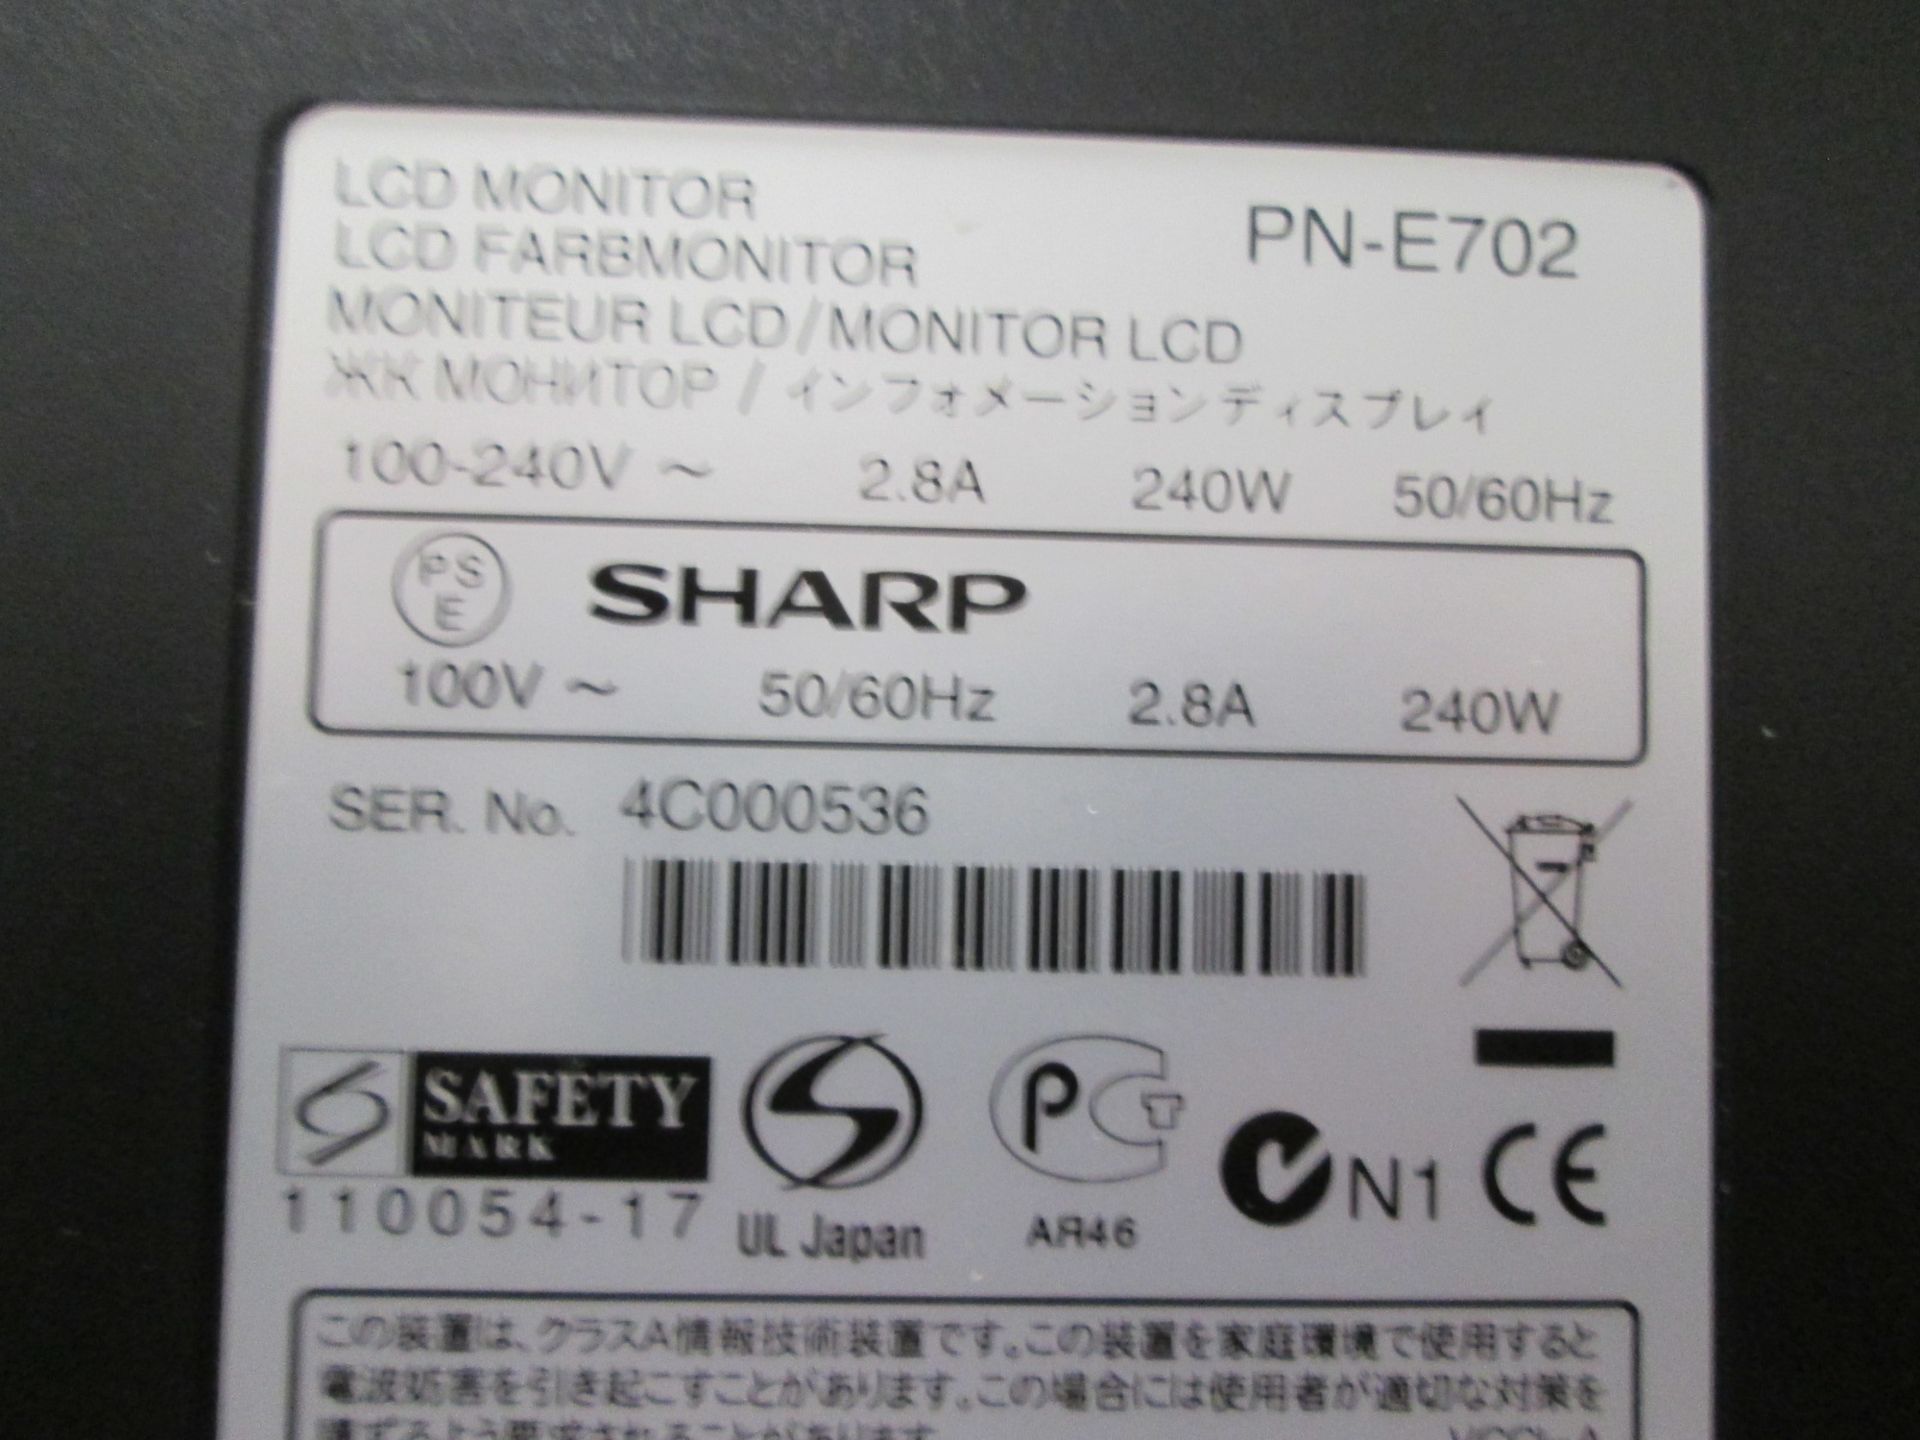 Sharp 70" LCD Colour Monitor, Model PN-E702, S/N 4C000536, In flight case with backplate and remote - Image 3 of 6